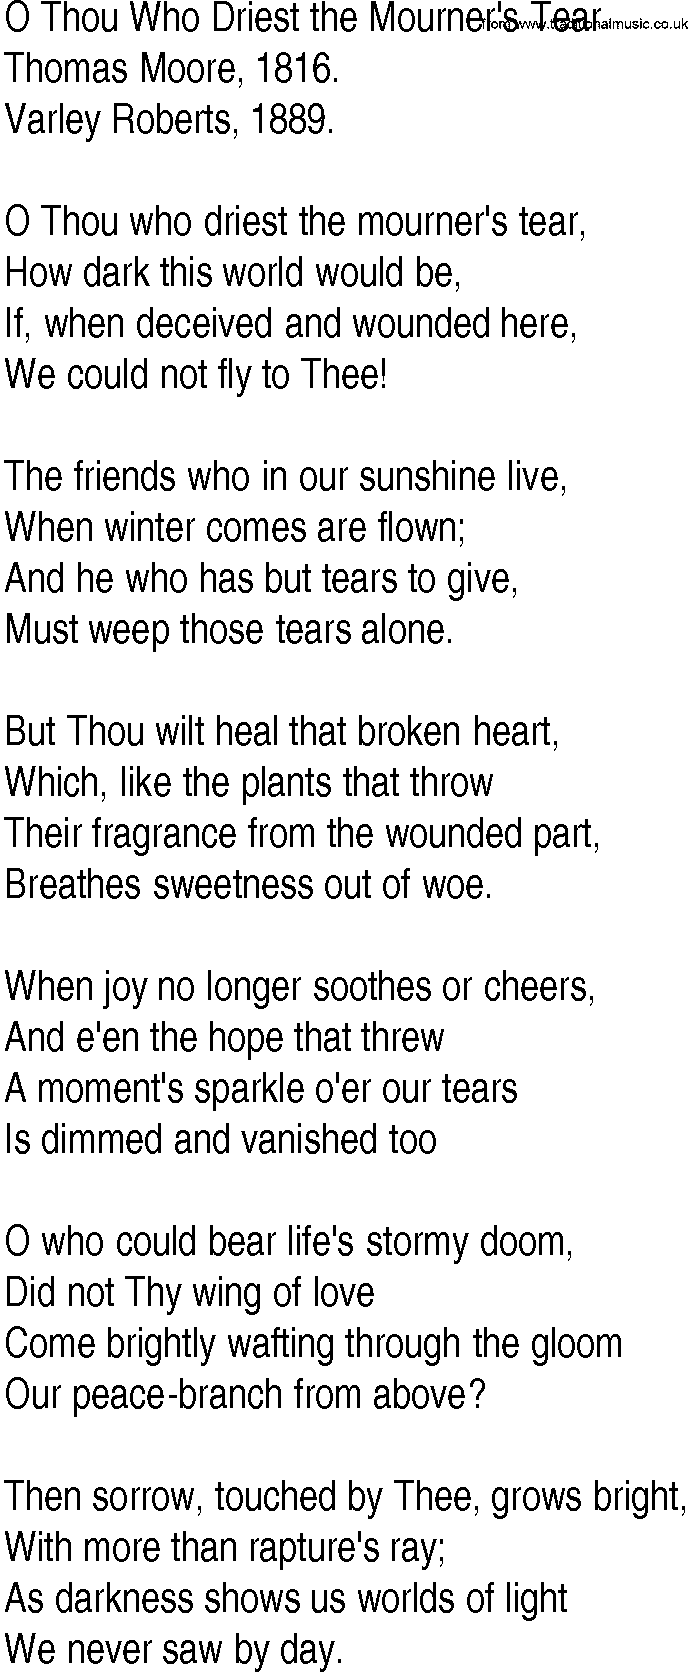 Hymn and Gospel Song: O Thou Who Driest the Mourner's Tear by Thomas Moore lyrics